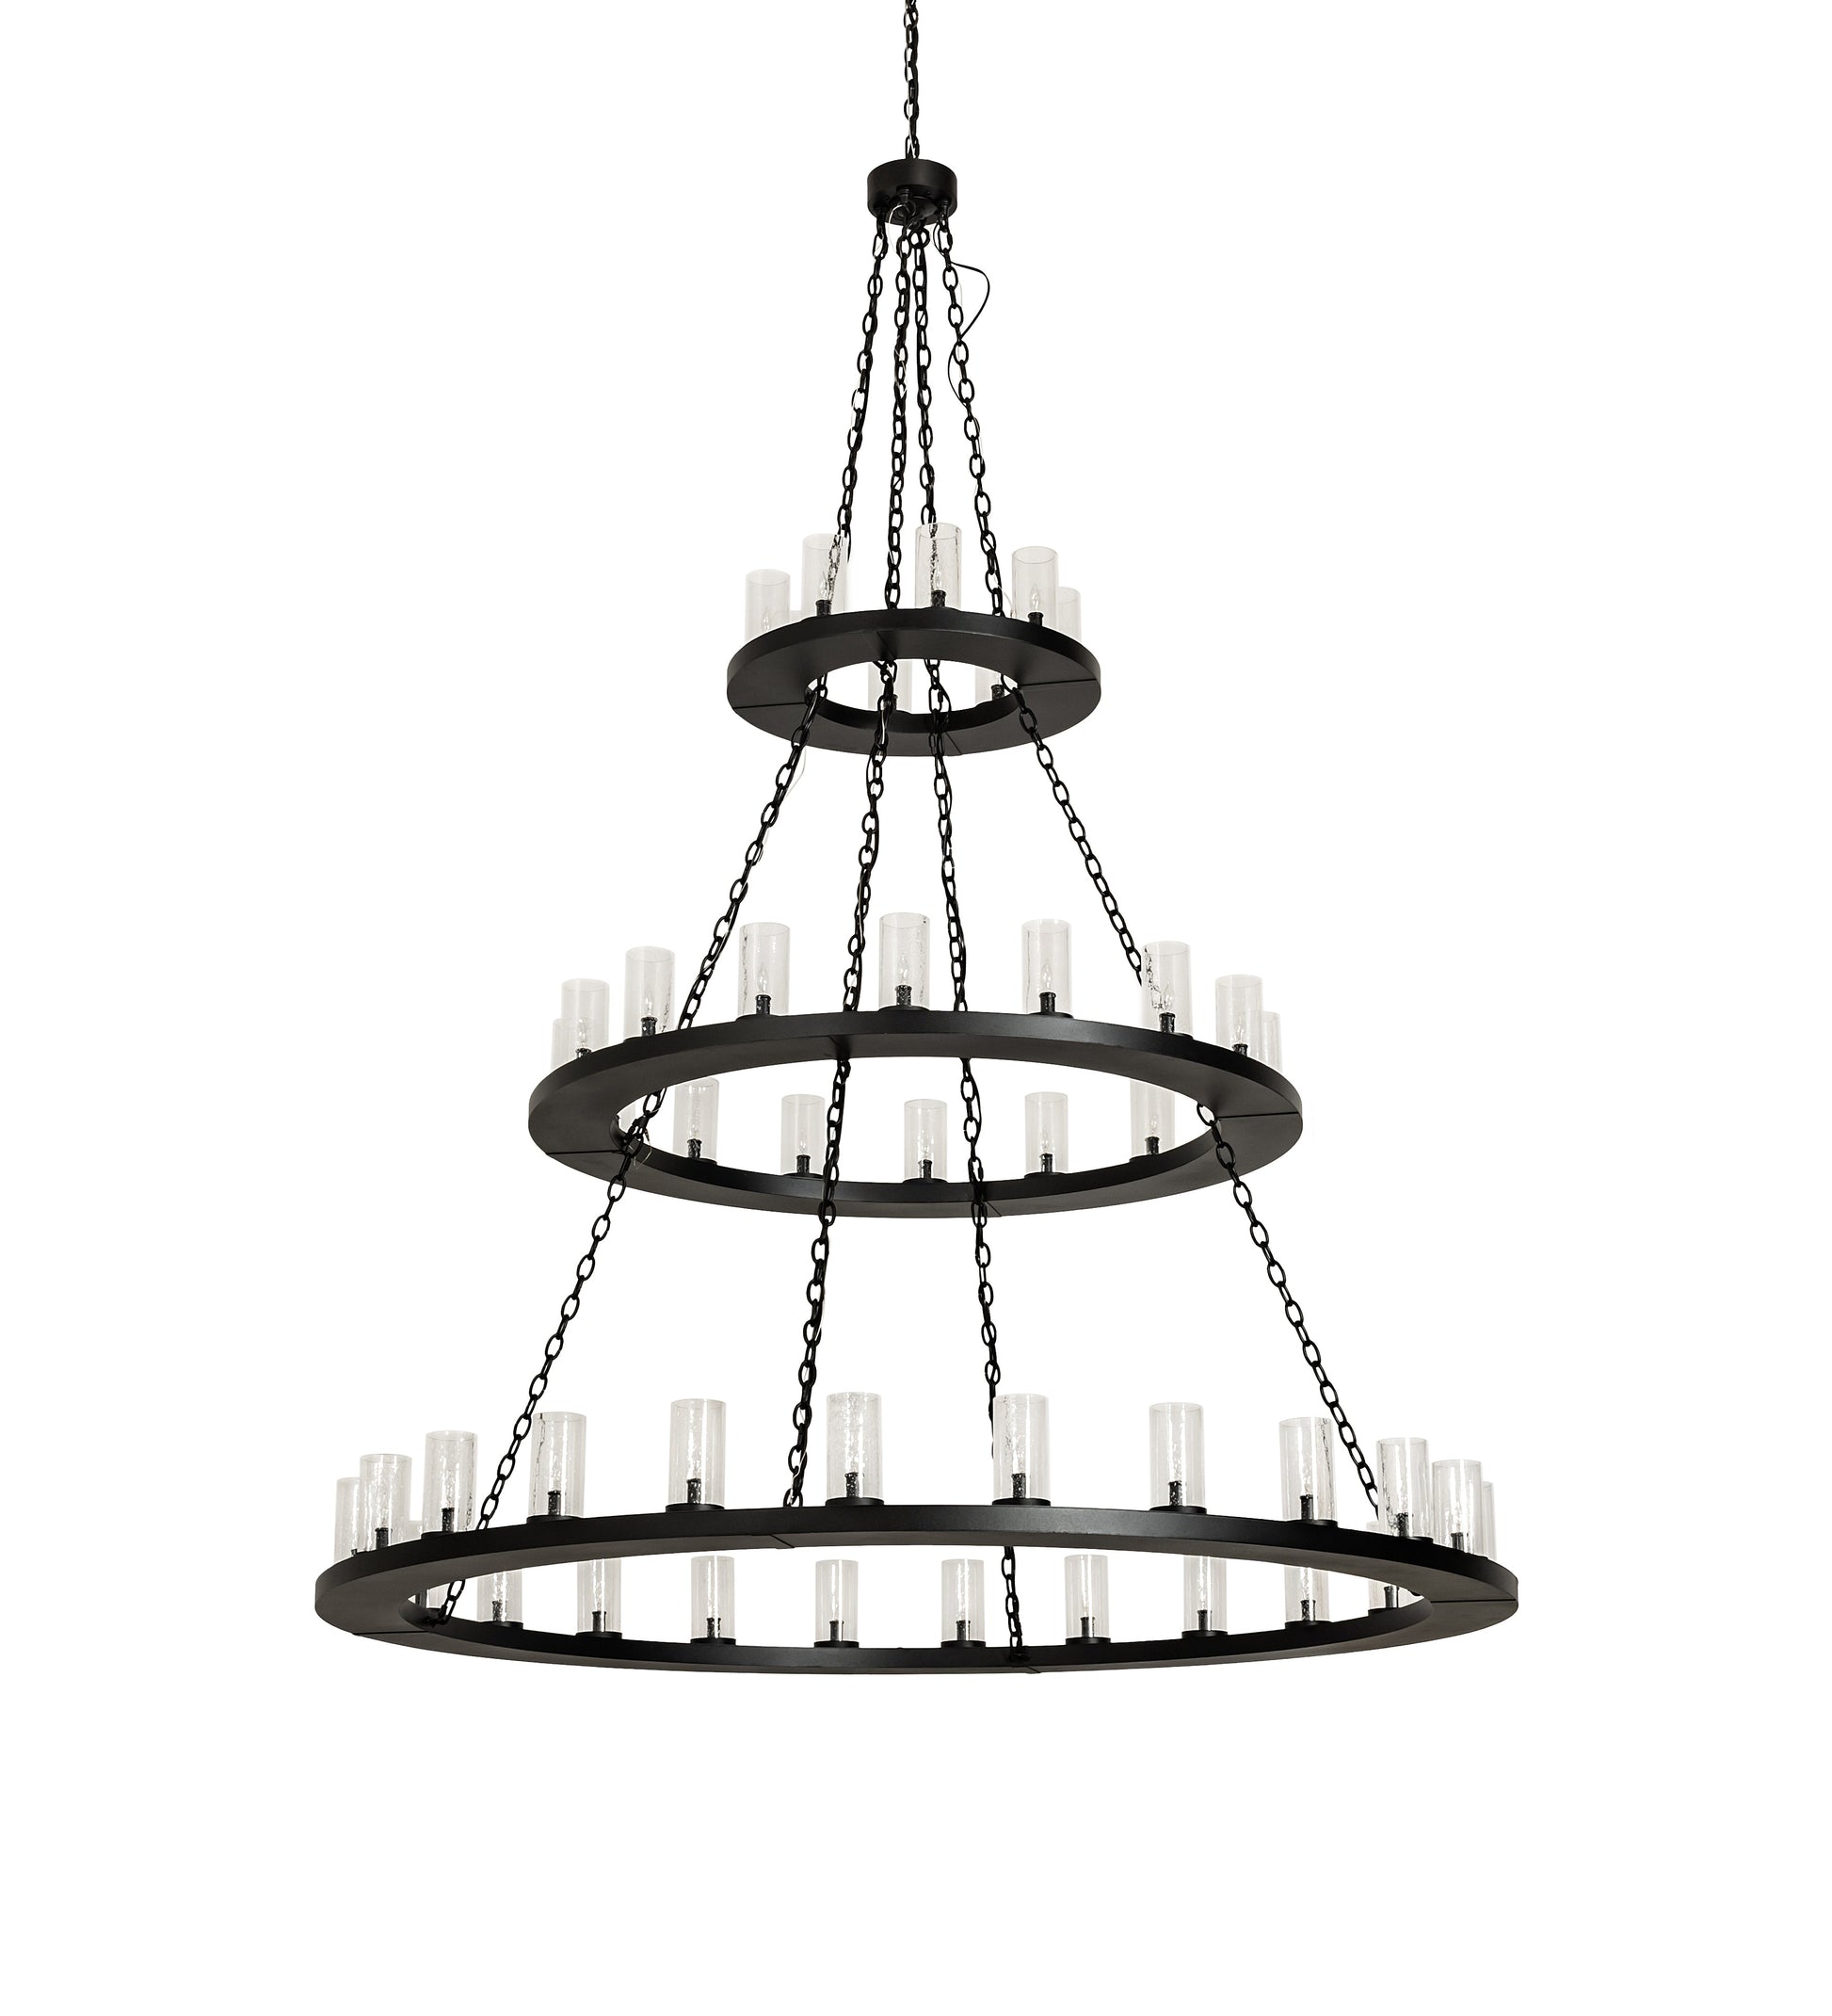 72" Loxley 48-Light Three Tier Chandelier by 2nd Ave Lighting